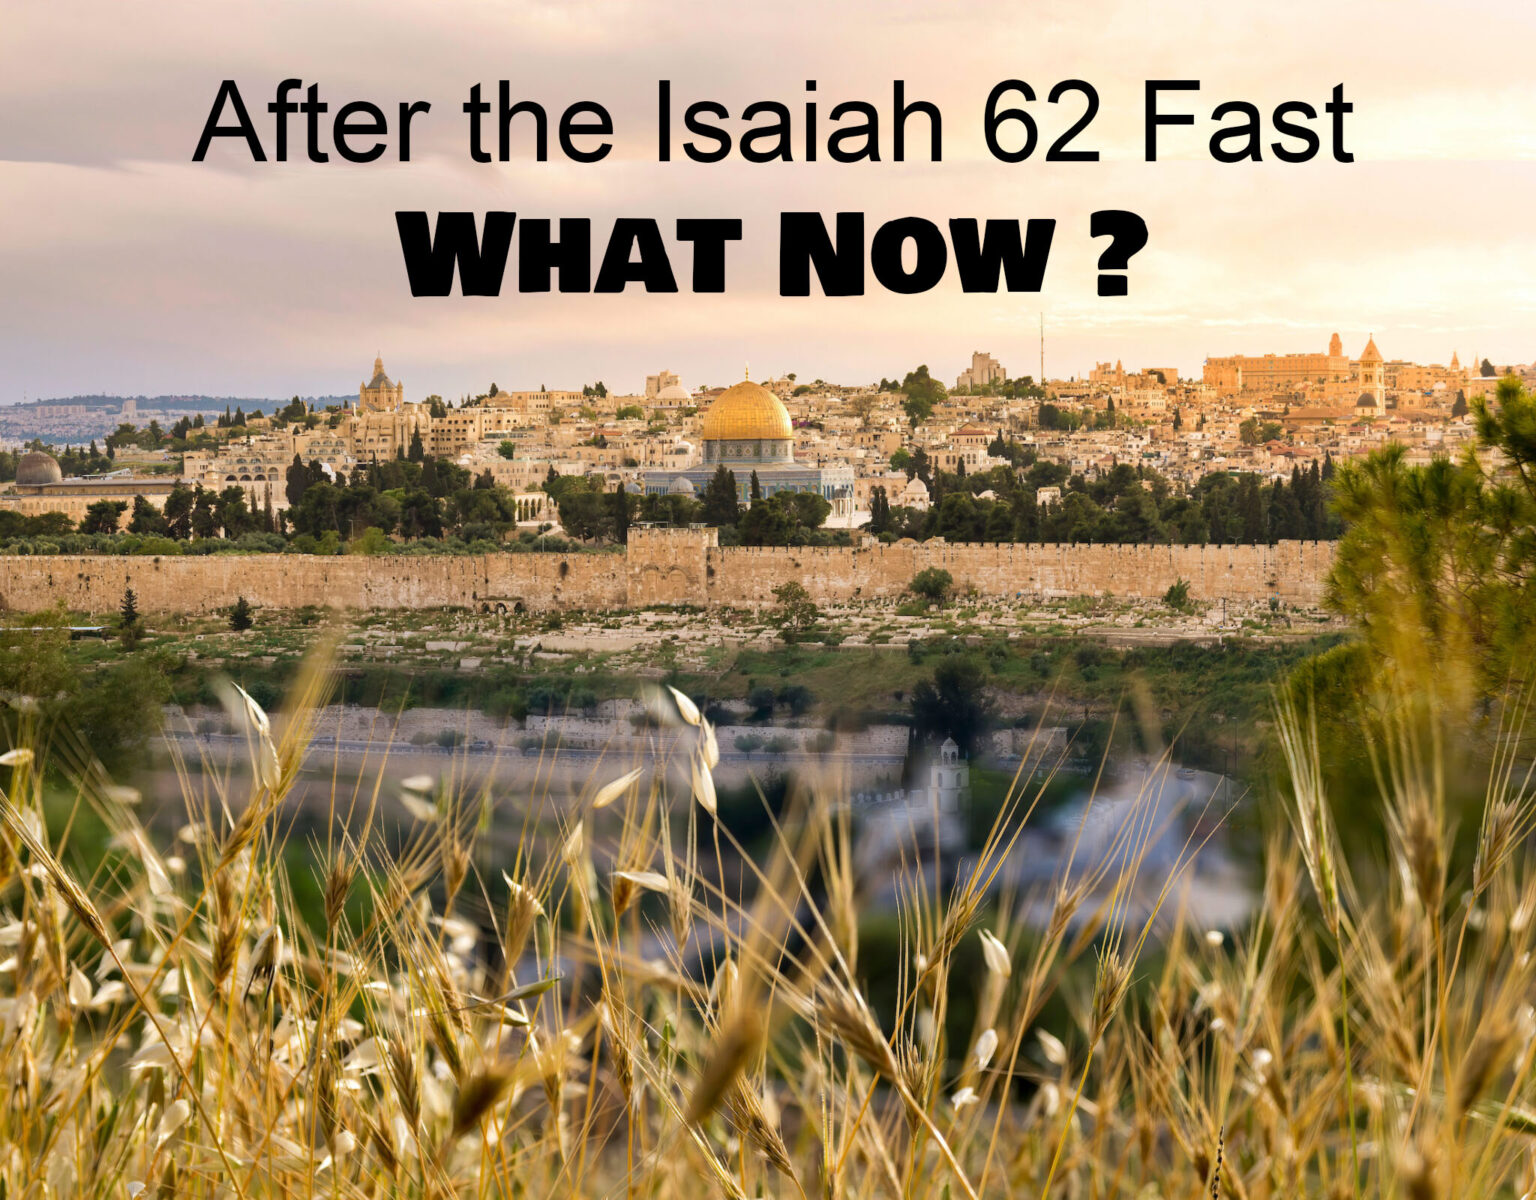 After the Isaiah 62 Fast, What Now?